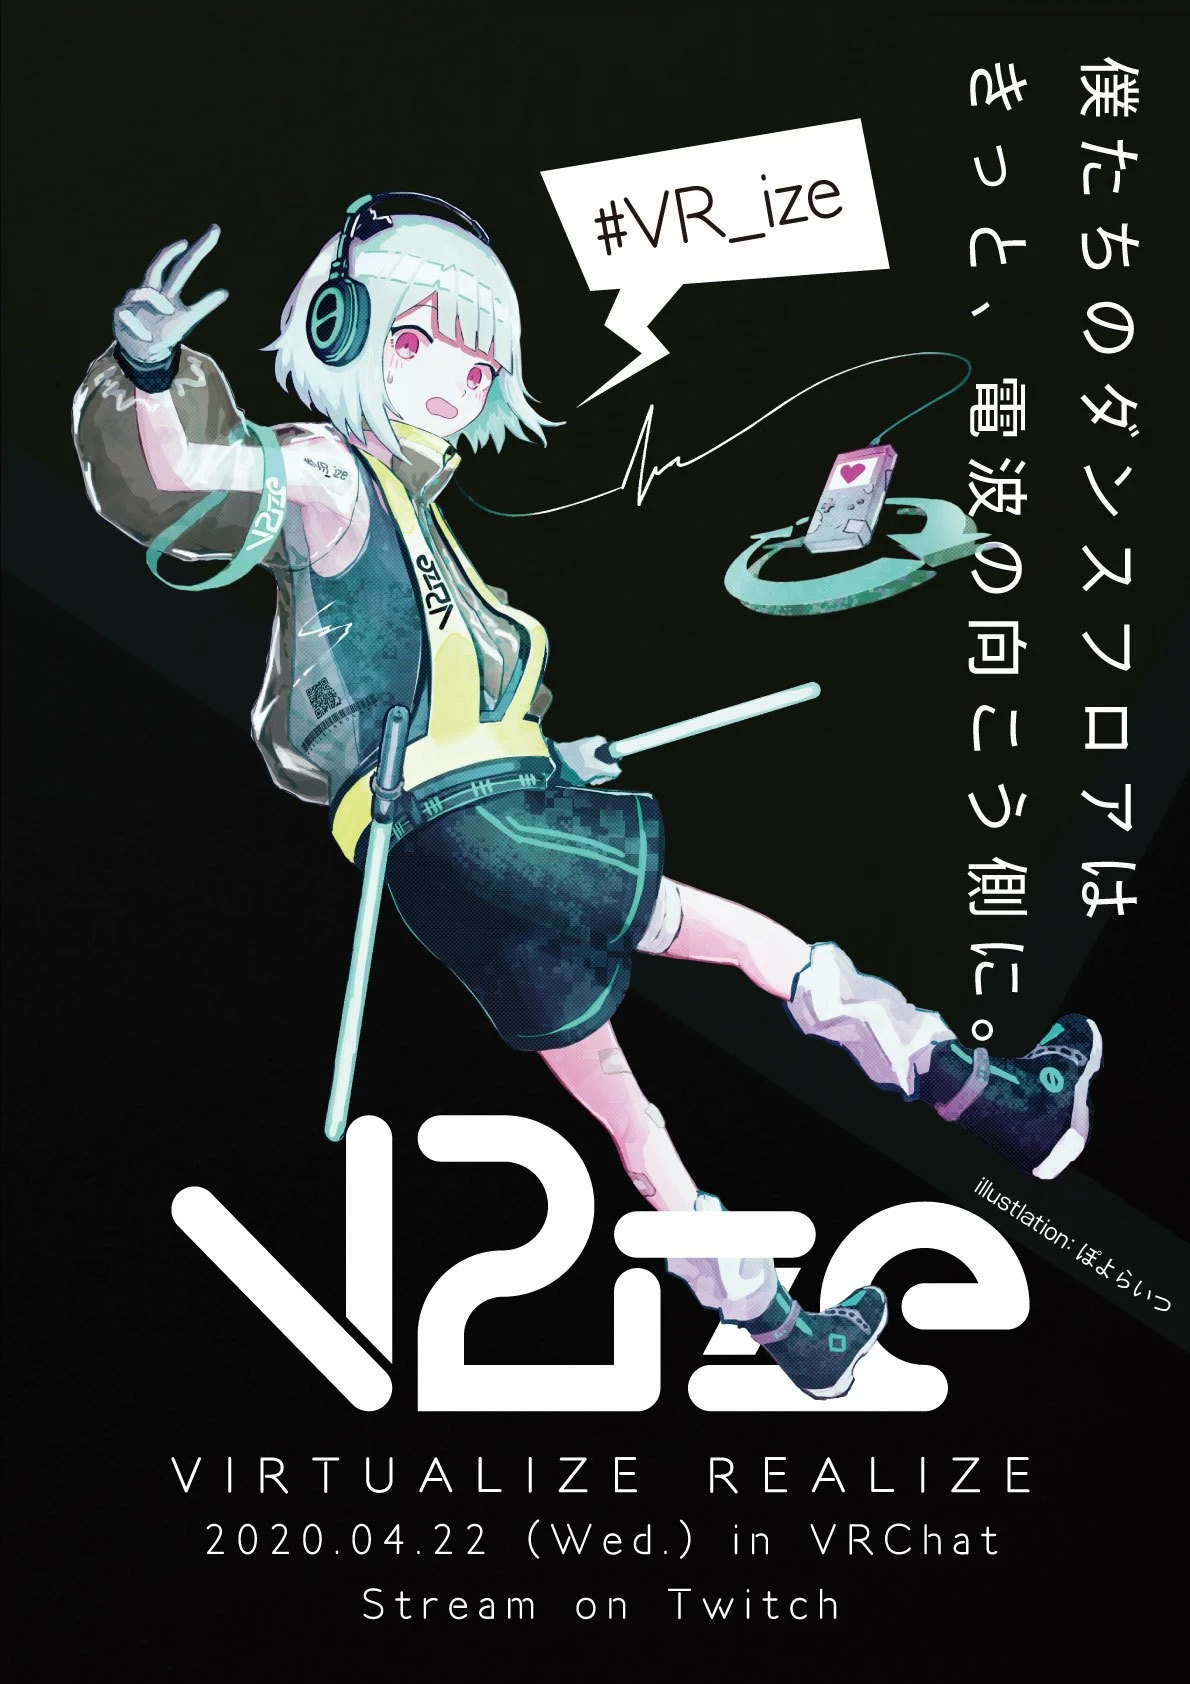 「VIRTUALIZE REALIZE vol.0」フライヤー／画像は公式サイトより